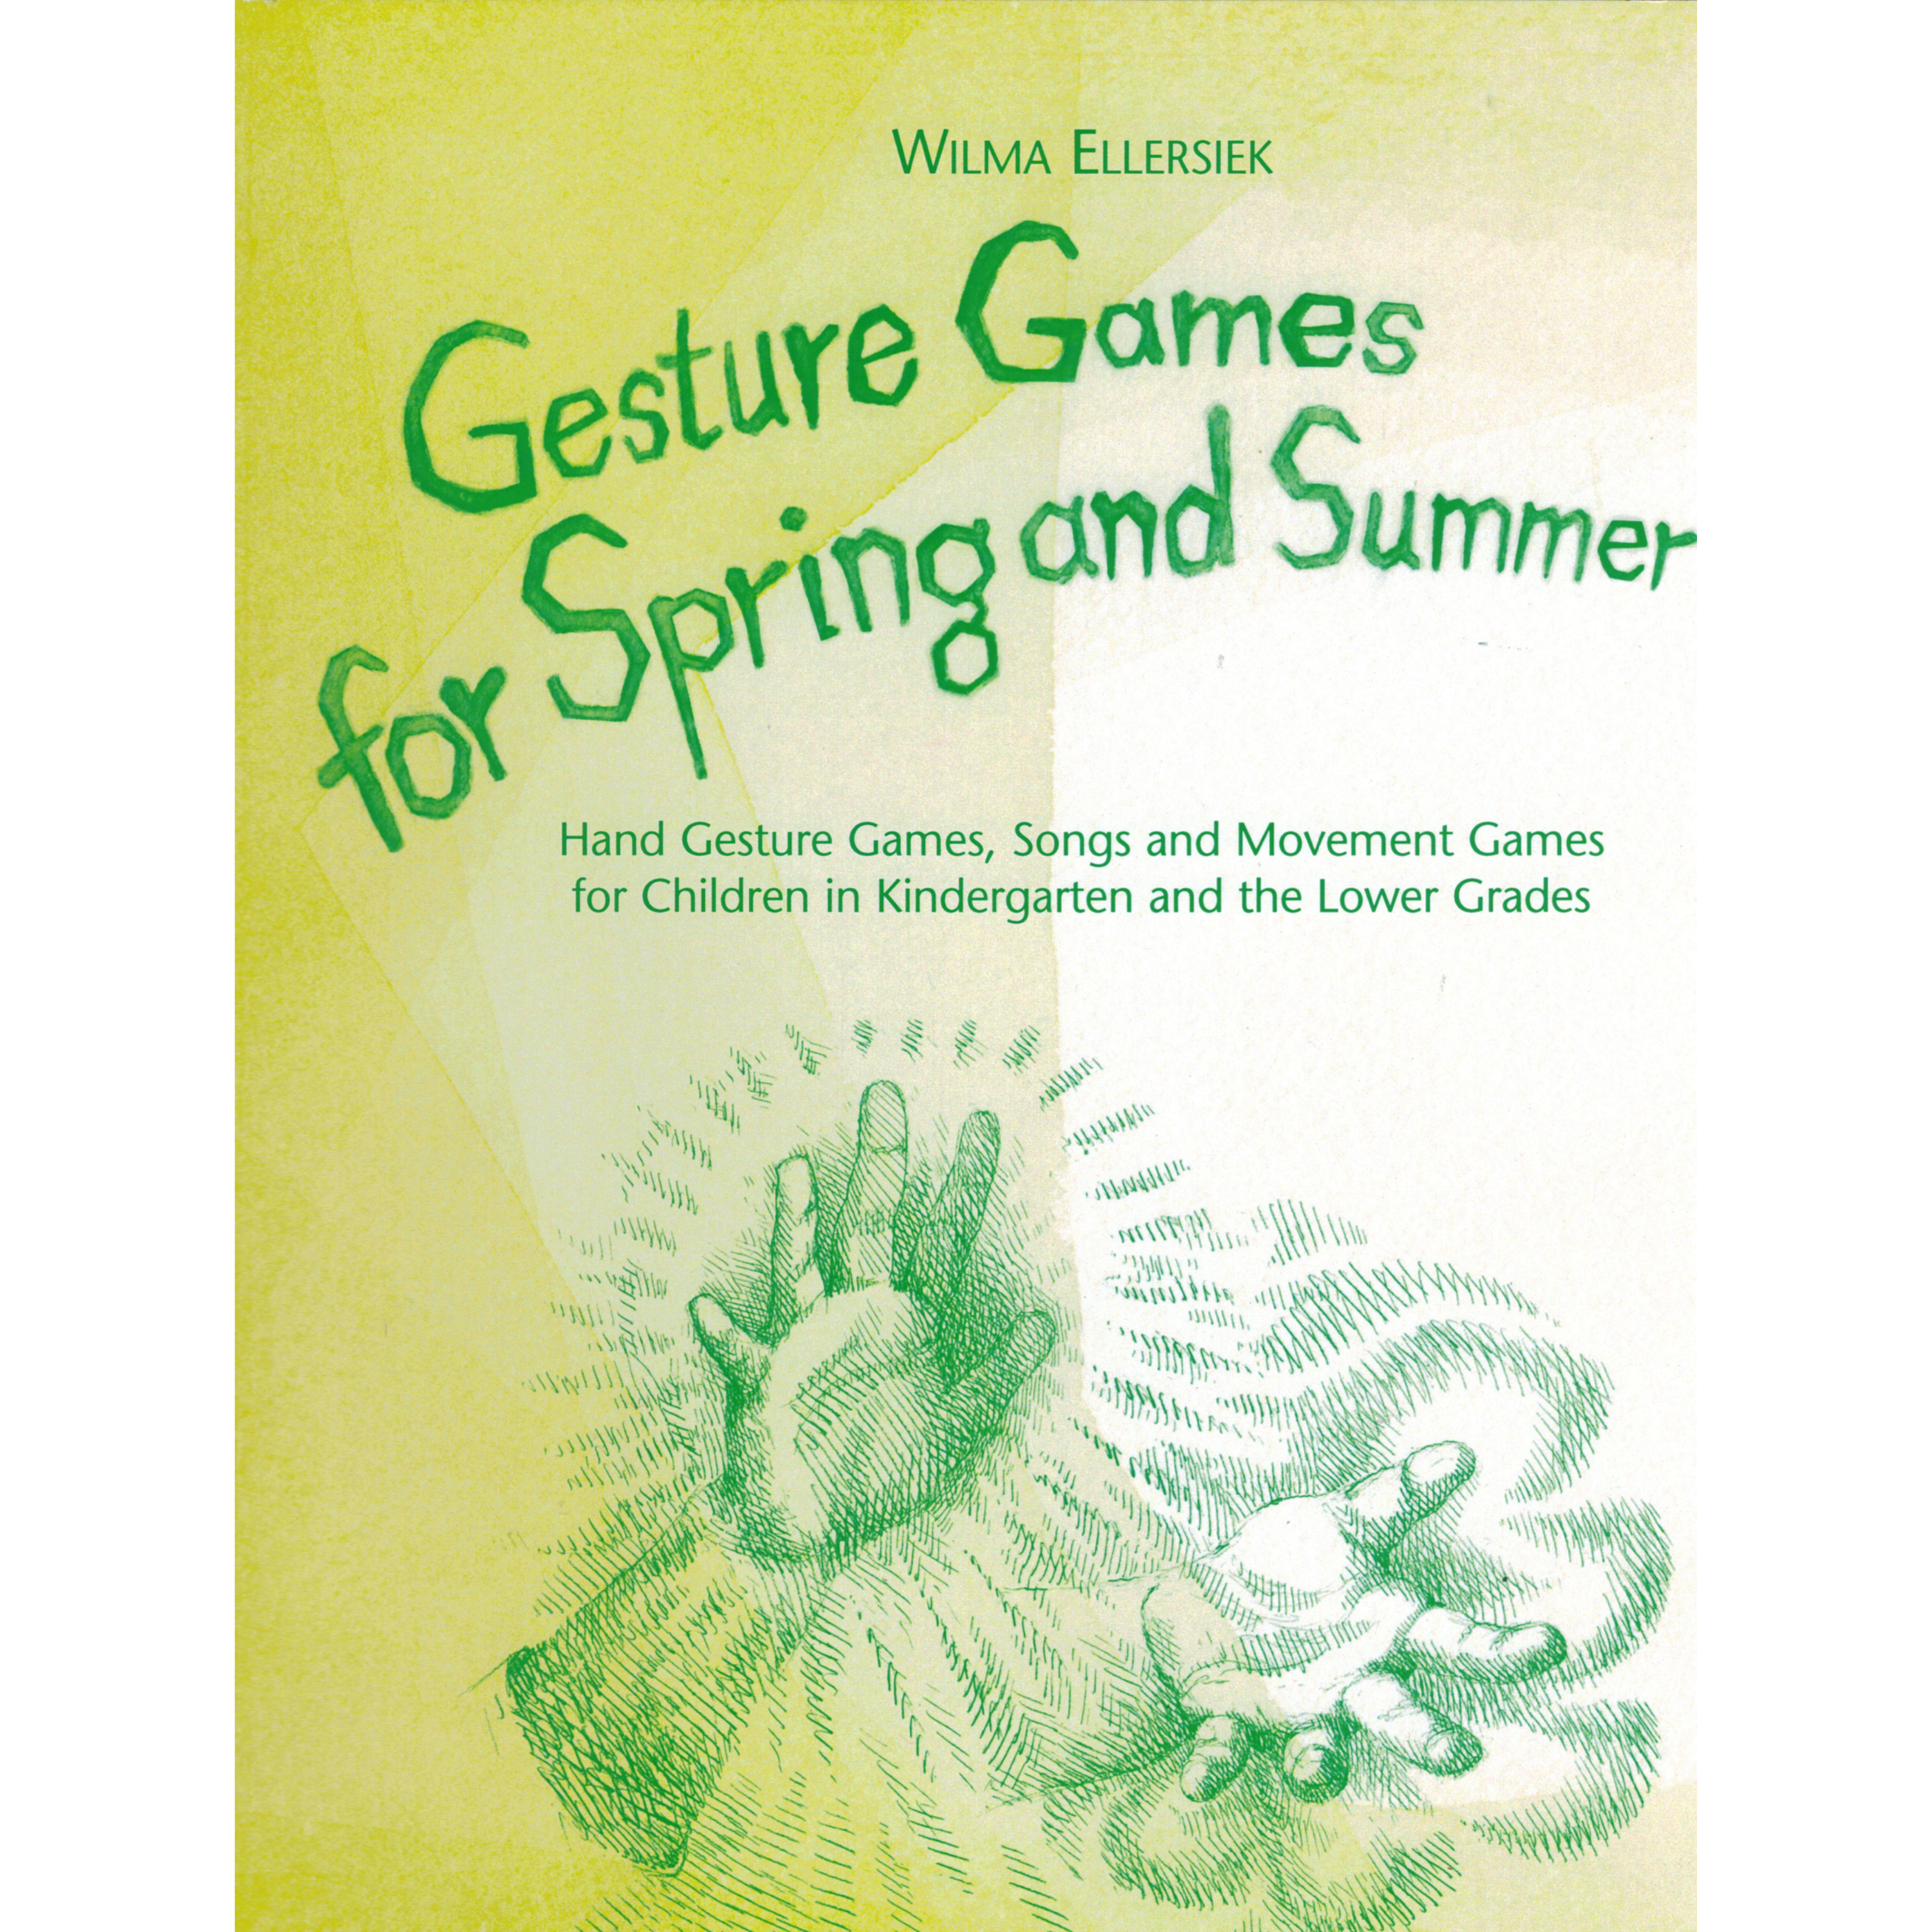 Gesture Games for Spring and Summer